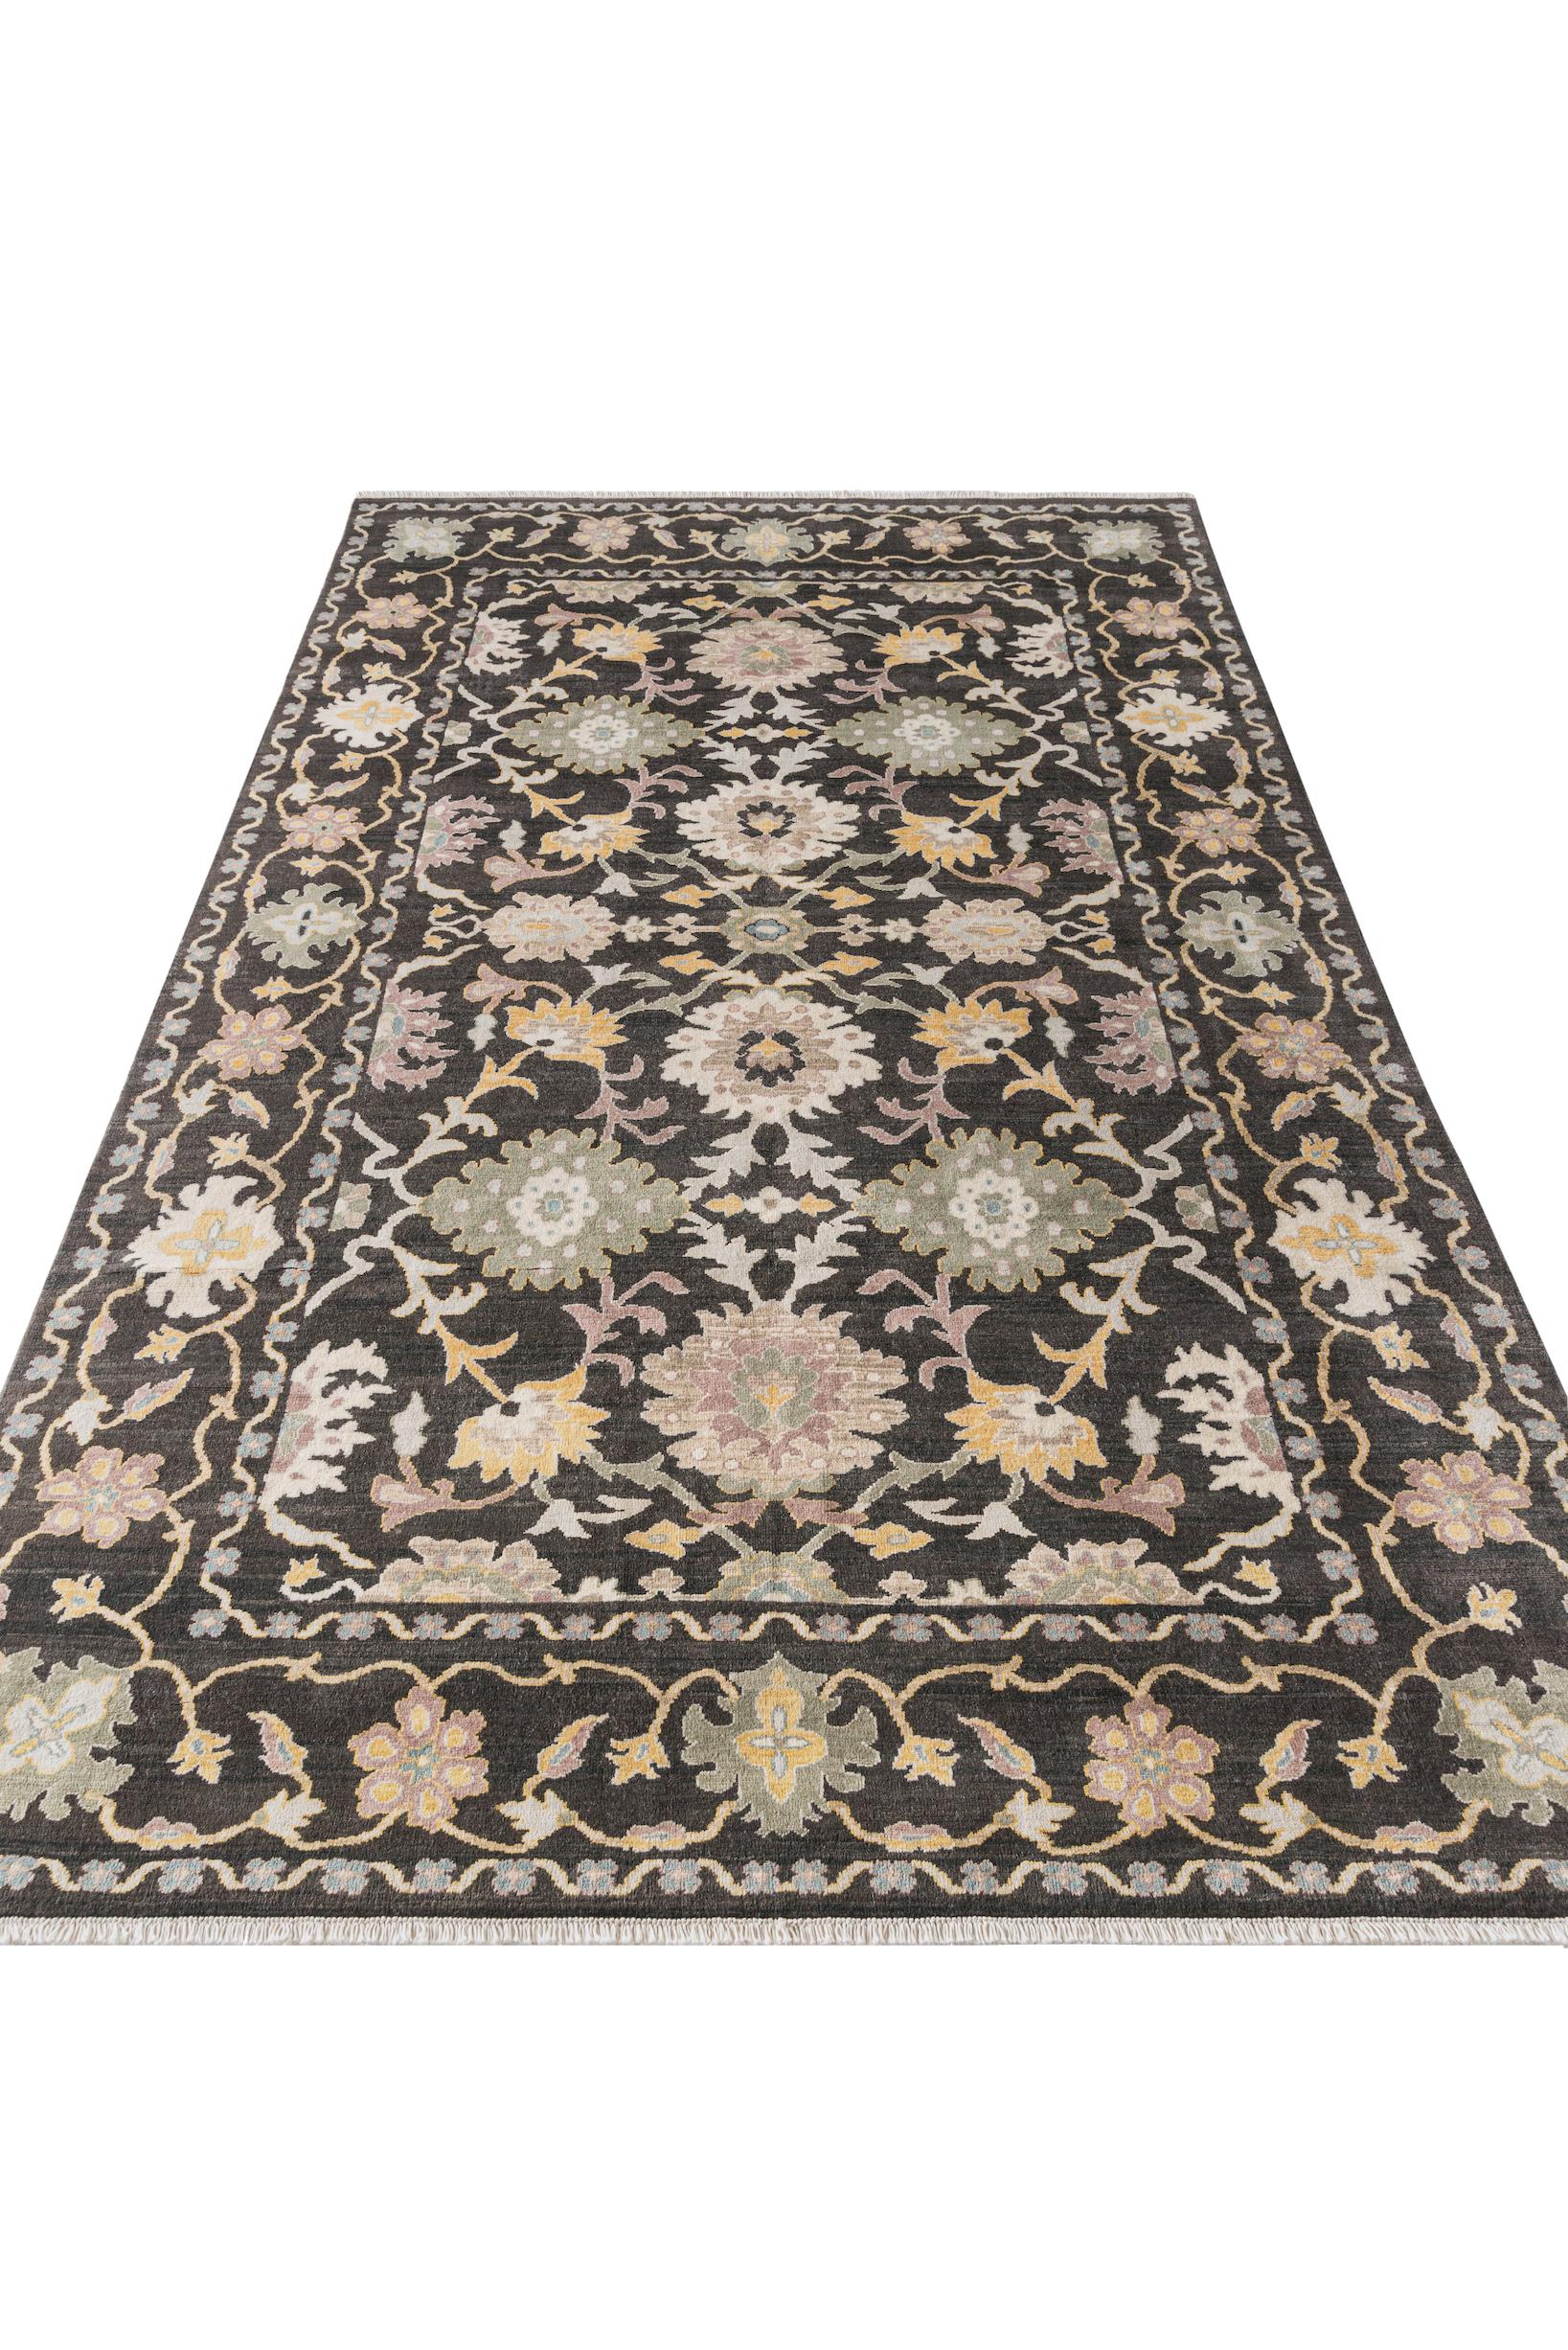 About the rug:
This 19th century-inspired floral Ziegler is a unique rug due to its handmade nature. It is handwoven by Egyptian artisans using hand-dyed 100% Egyptian wool. The area rug is a perfect size for a standard living space. 
The design of